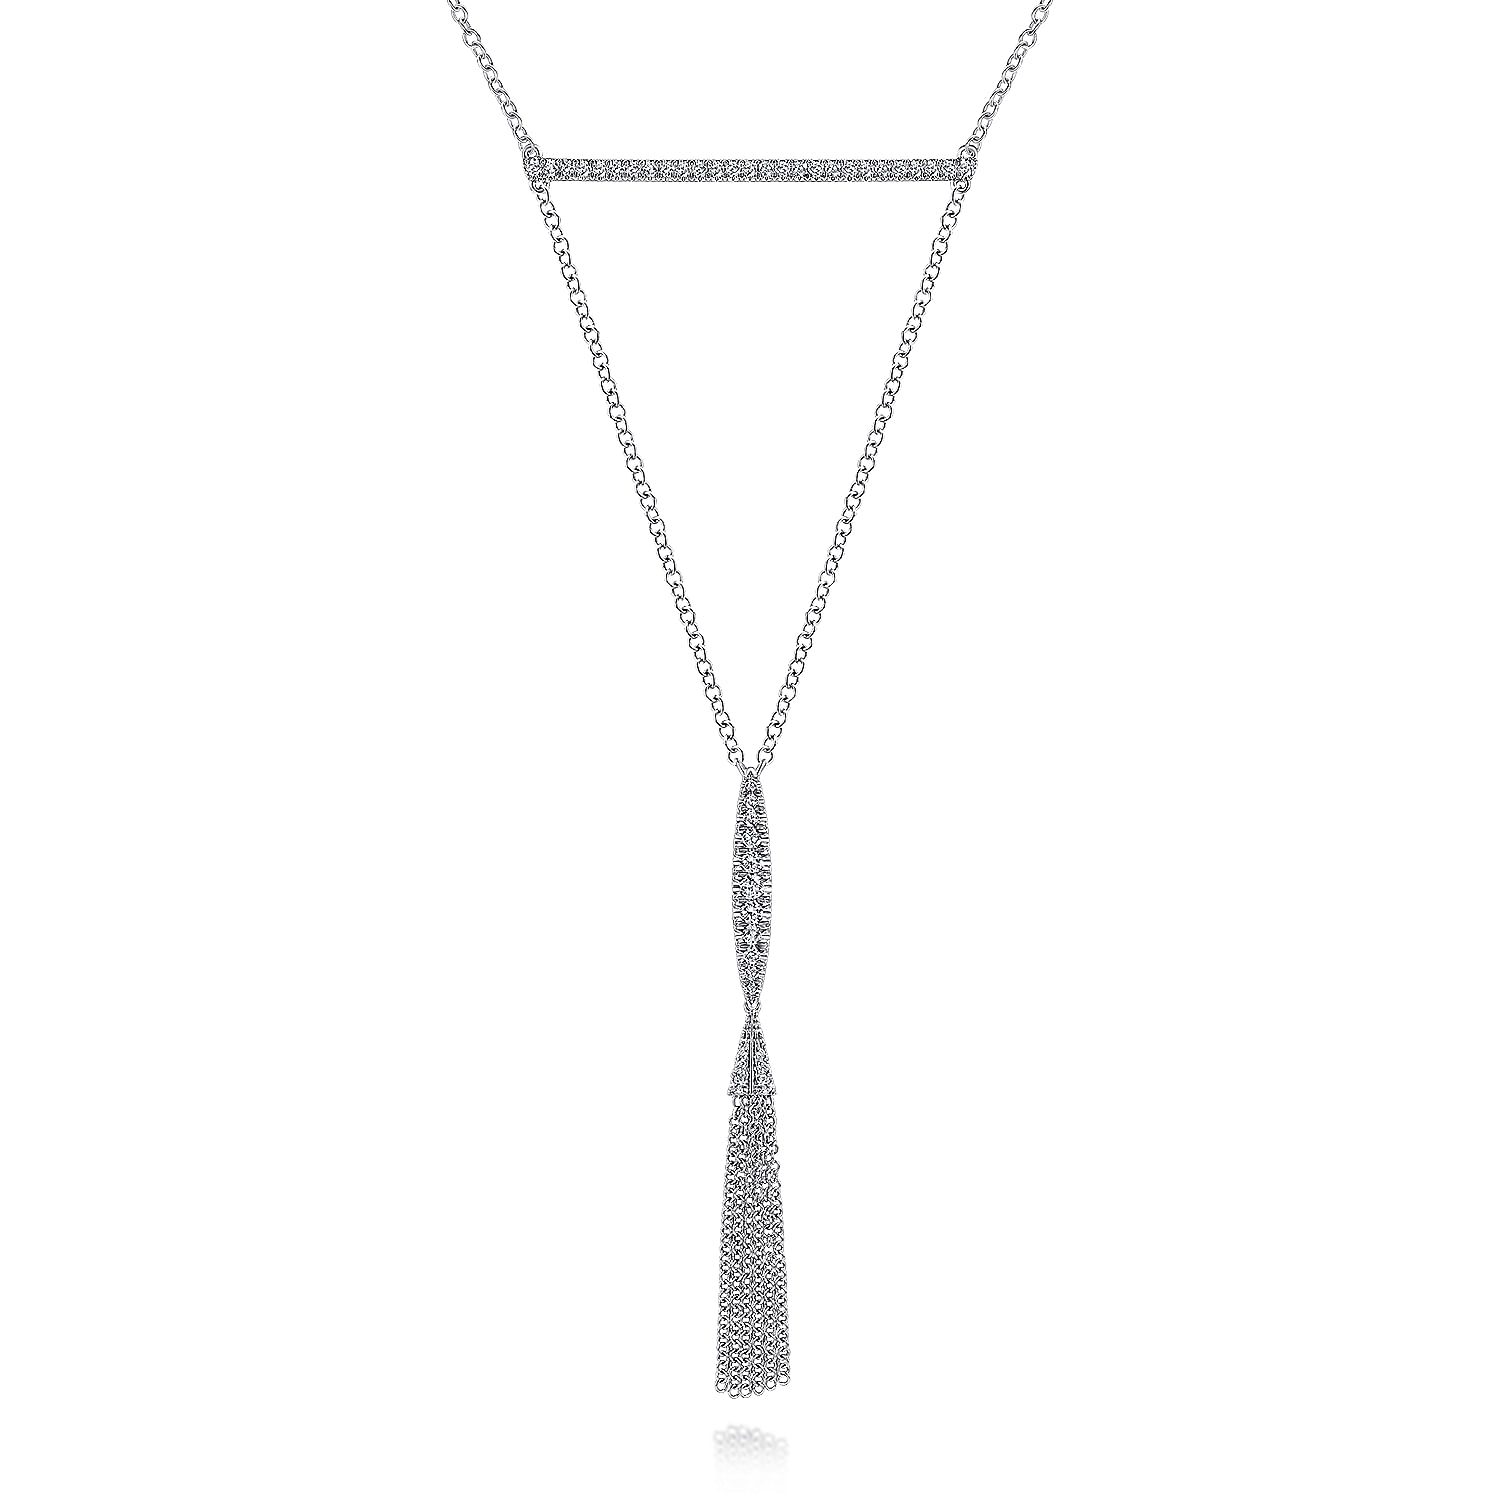 27 inch 14K White Gold Pavé Diamond Bar and Y Tassel Necklace